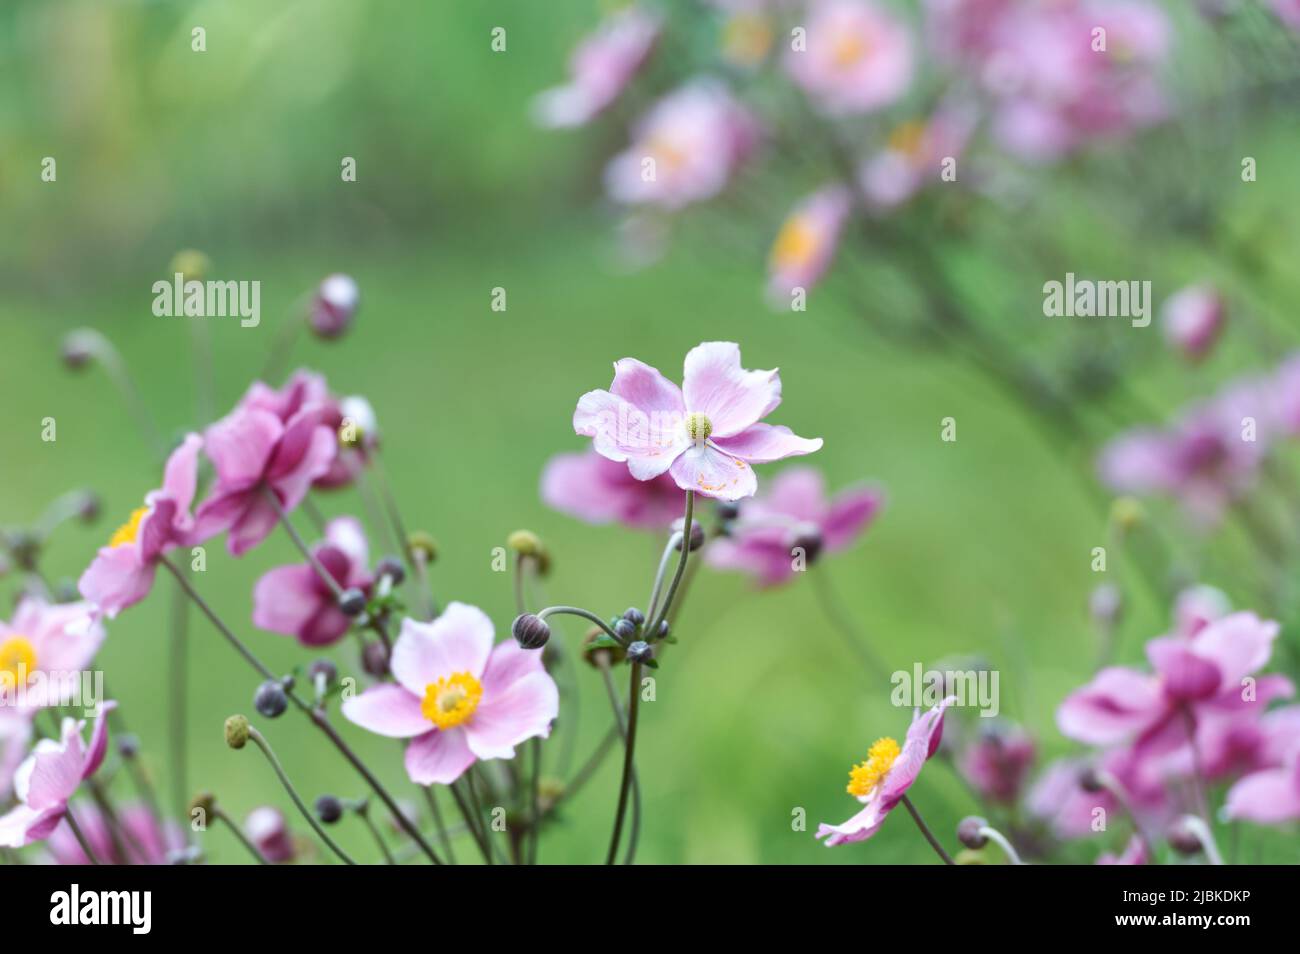 Nature background with spring flowers. (Anemone scabiosa). Selective and soft focus. Copy space. Stock Photo